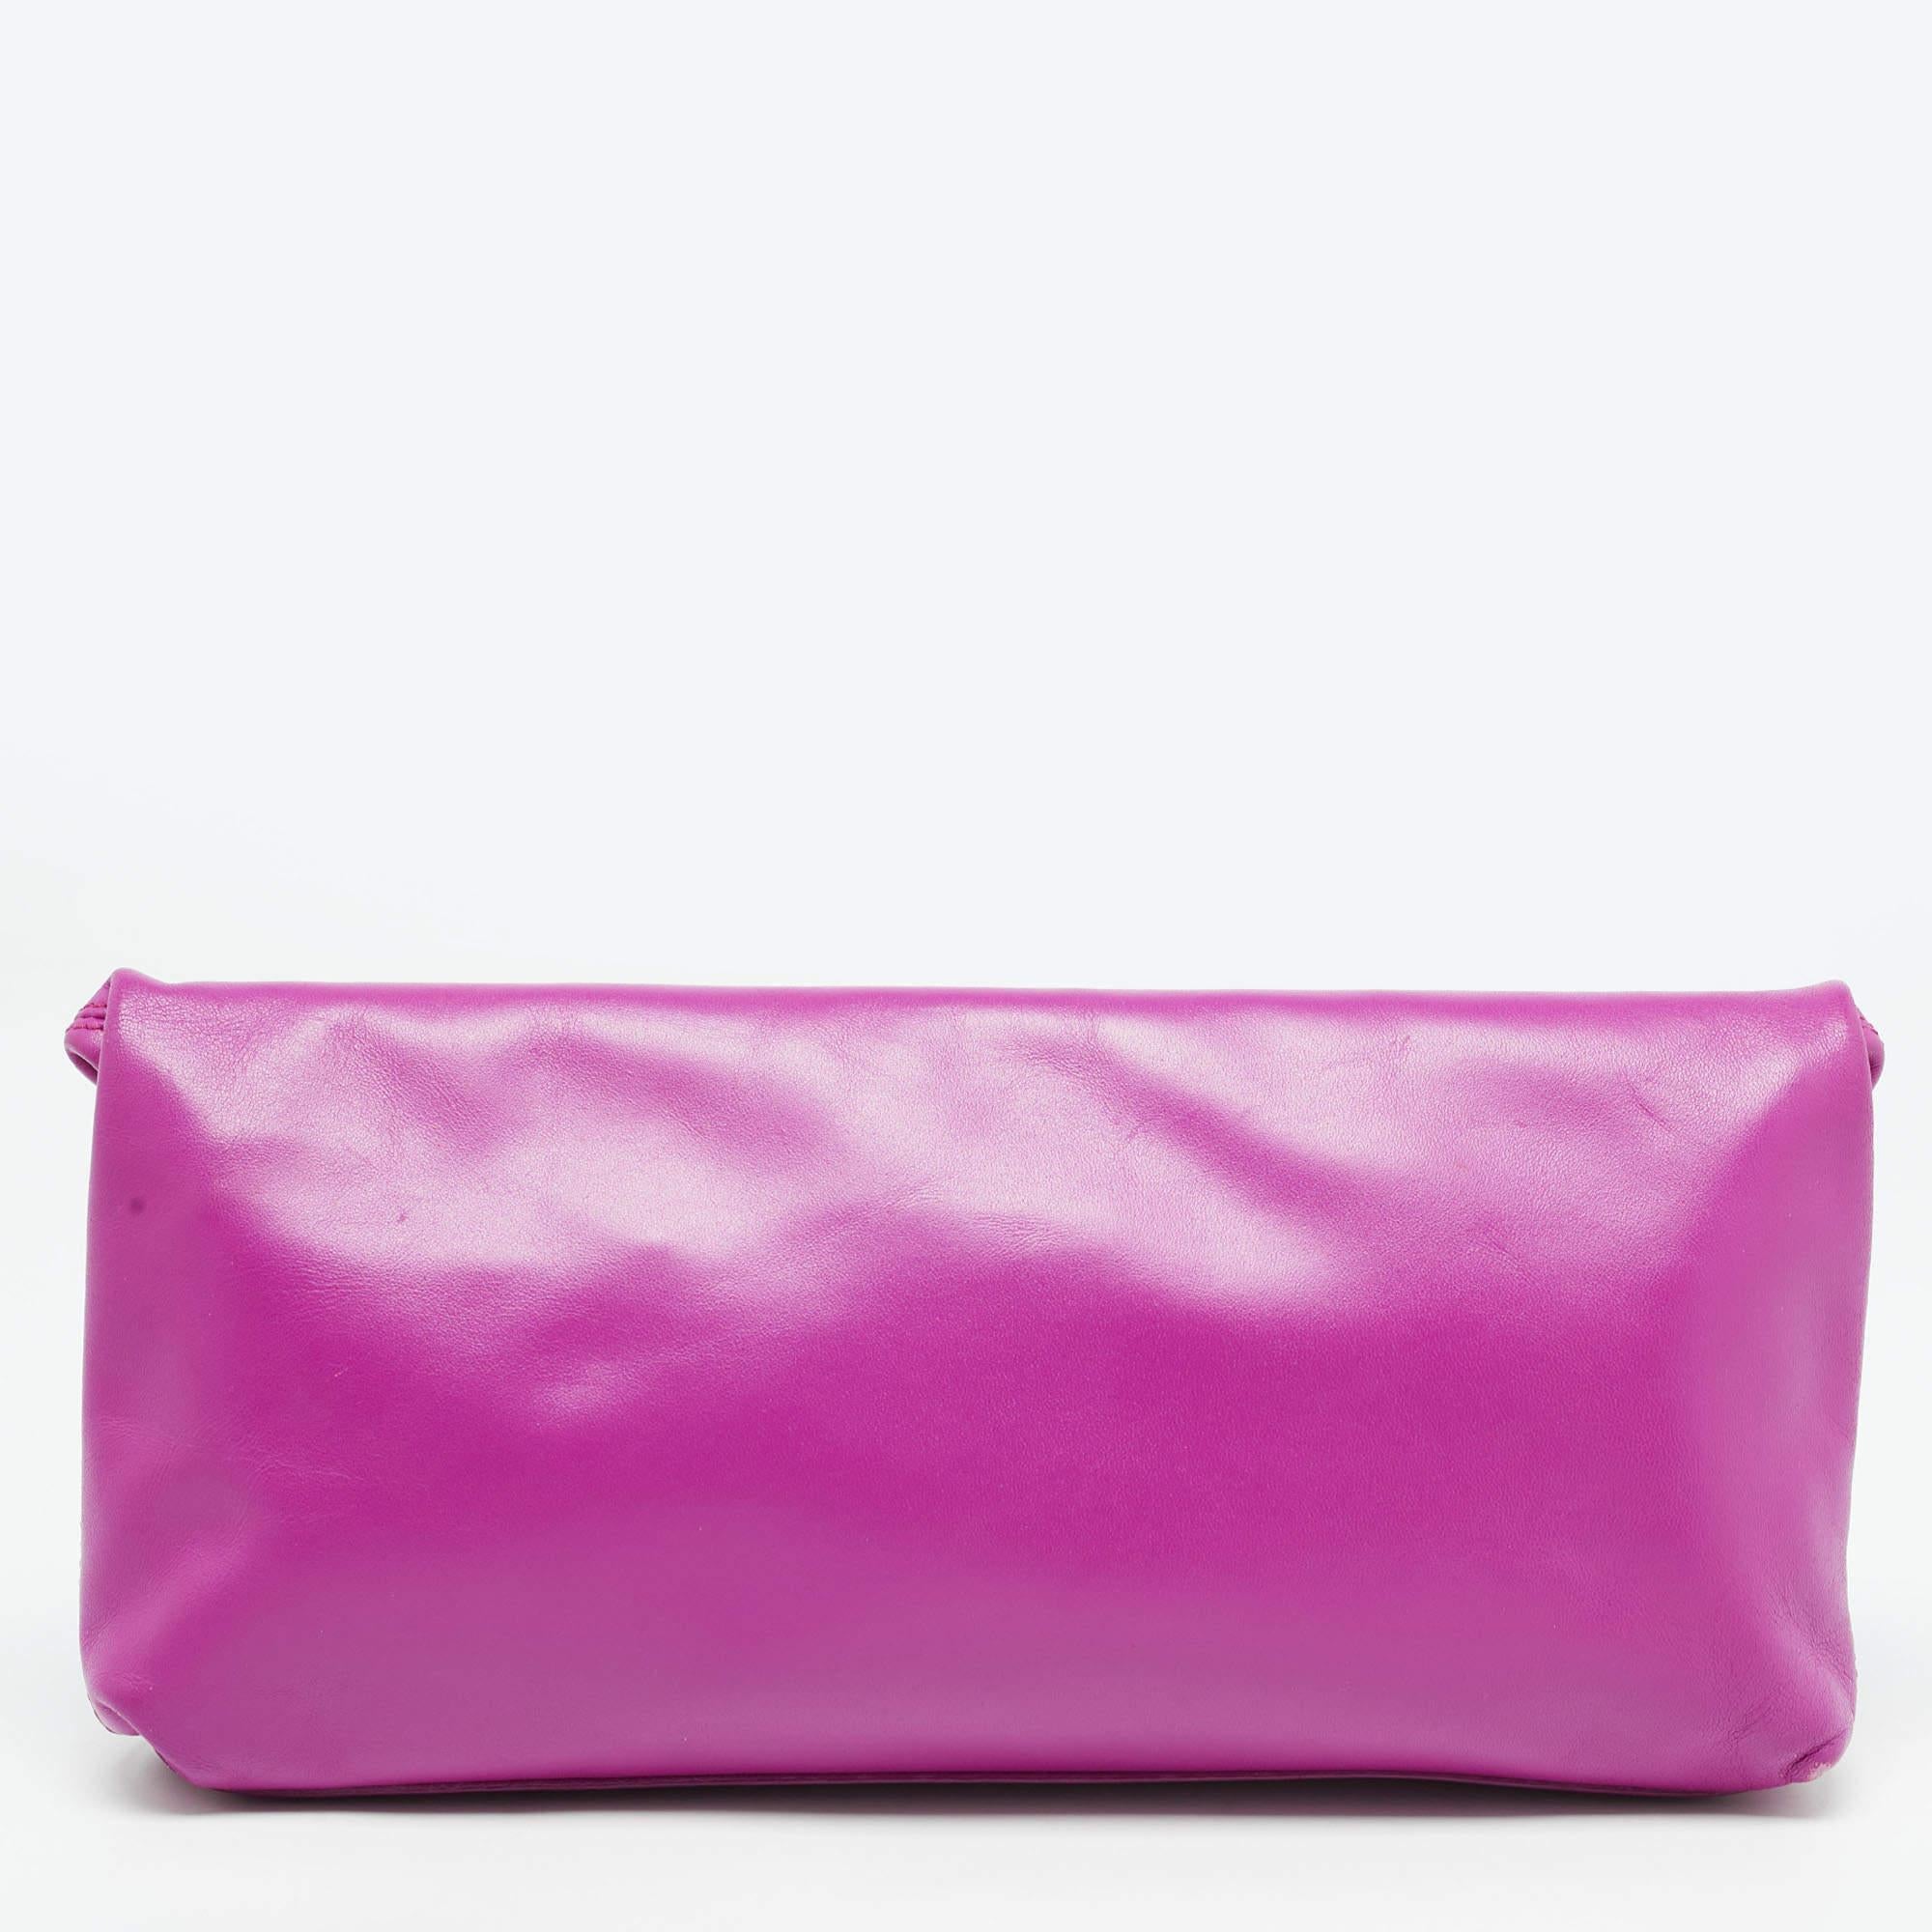 This stunning Alexander McQueen fold over clutch is a perfect party wear accessory with its classic look and a subtle rocker chic style. Crafted in fucshia leather, this clutch features a gold tone studded front along with a skull designed padlock